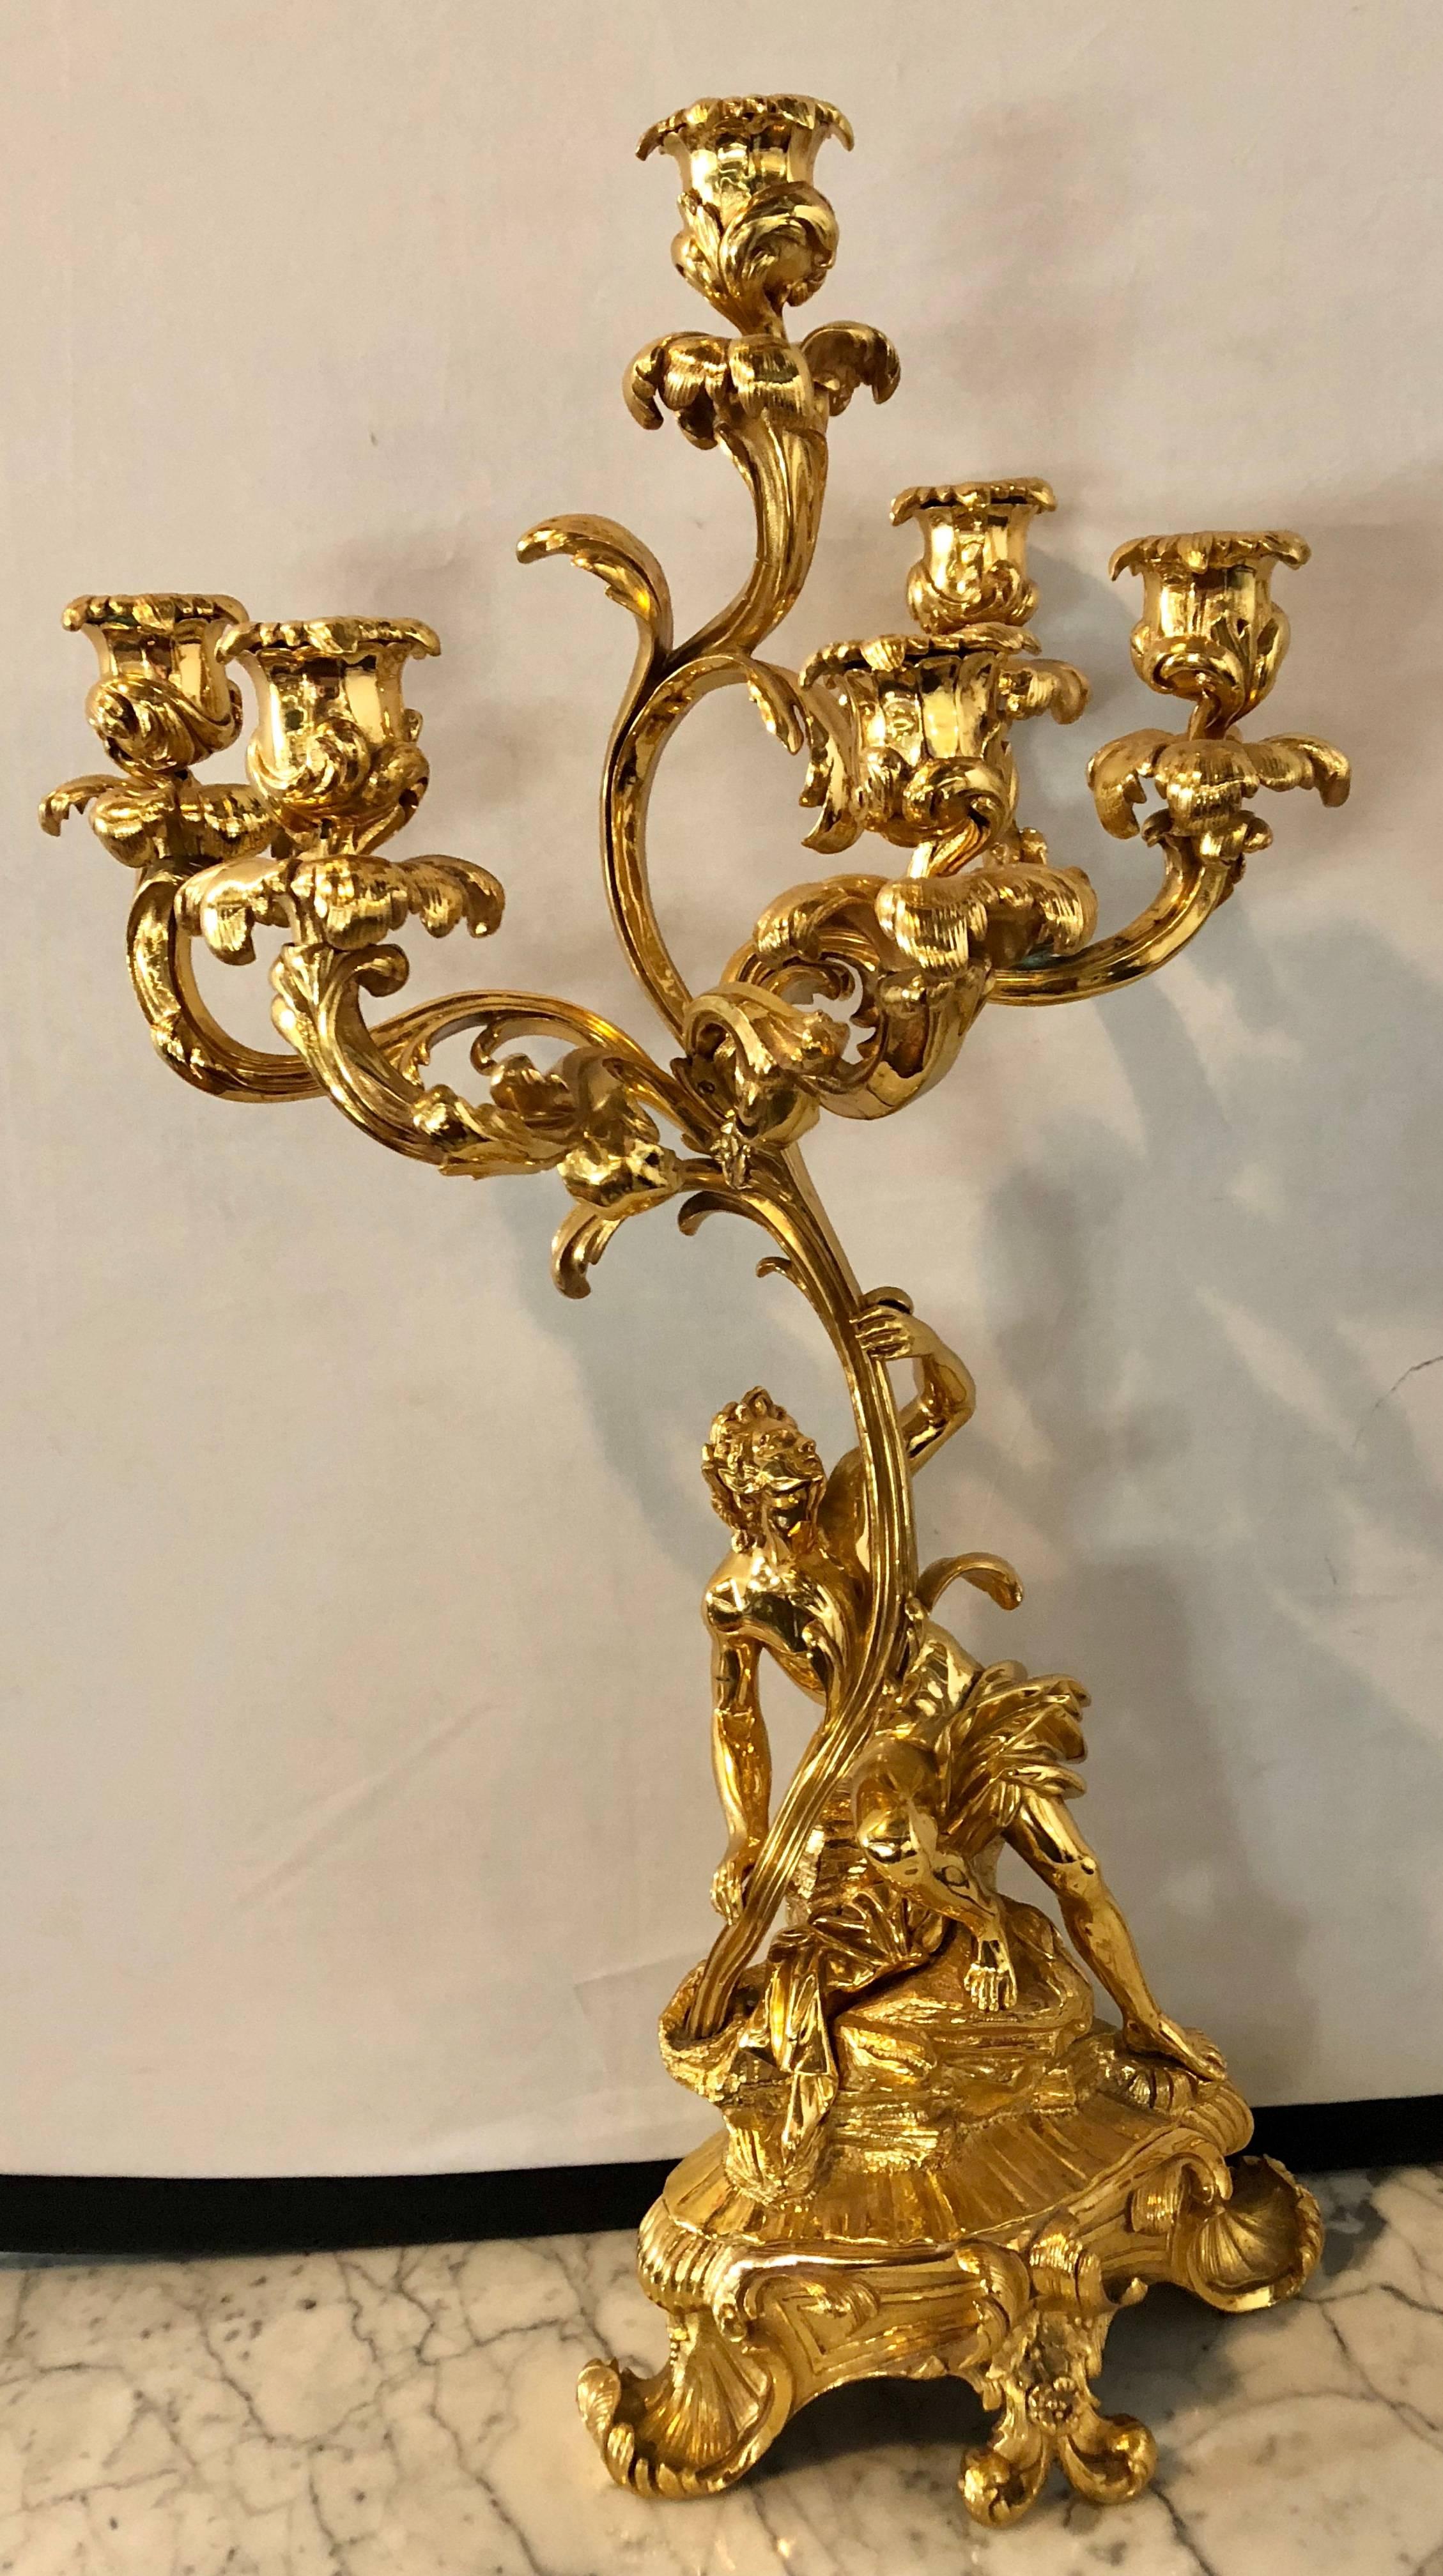 Pair of stunning Louis XVI style 19th century bronze 24-carat gold-plated six-arm figural candelabras. Each having five arms forming a large candelabra supported by a man and the mate a woman each standing full figured on a pedestal base facing each